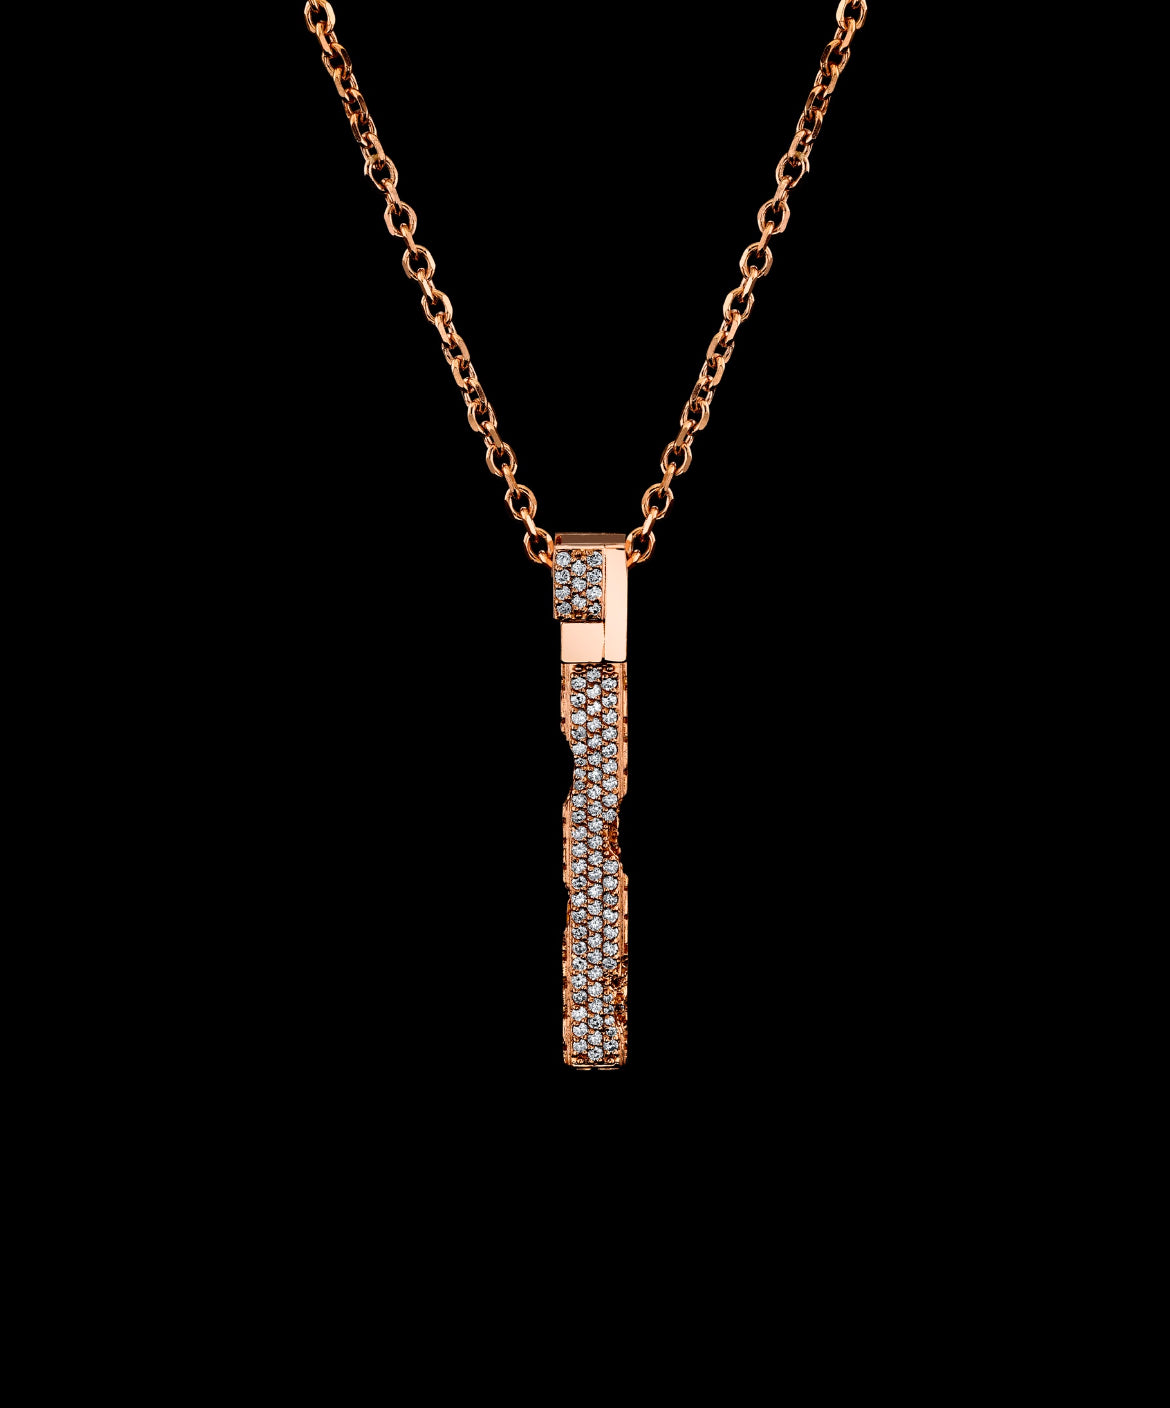 Eroded Architecture 18k Rose Gold Large Bar Necklace with pavé set round brilliant diamonds.  Edition of 30.